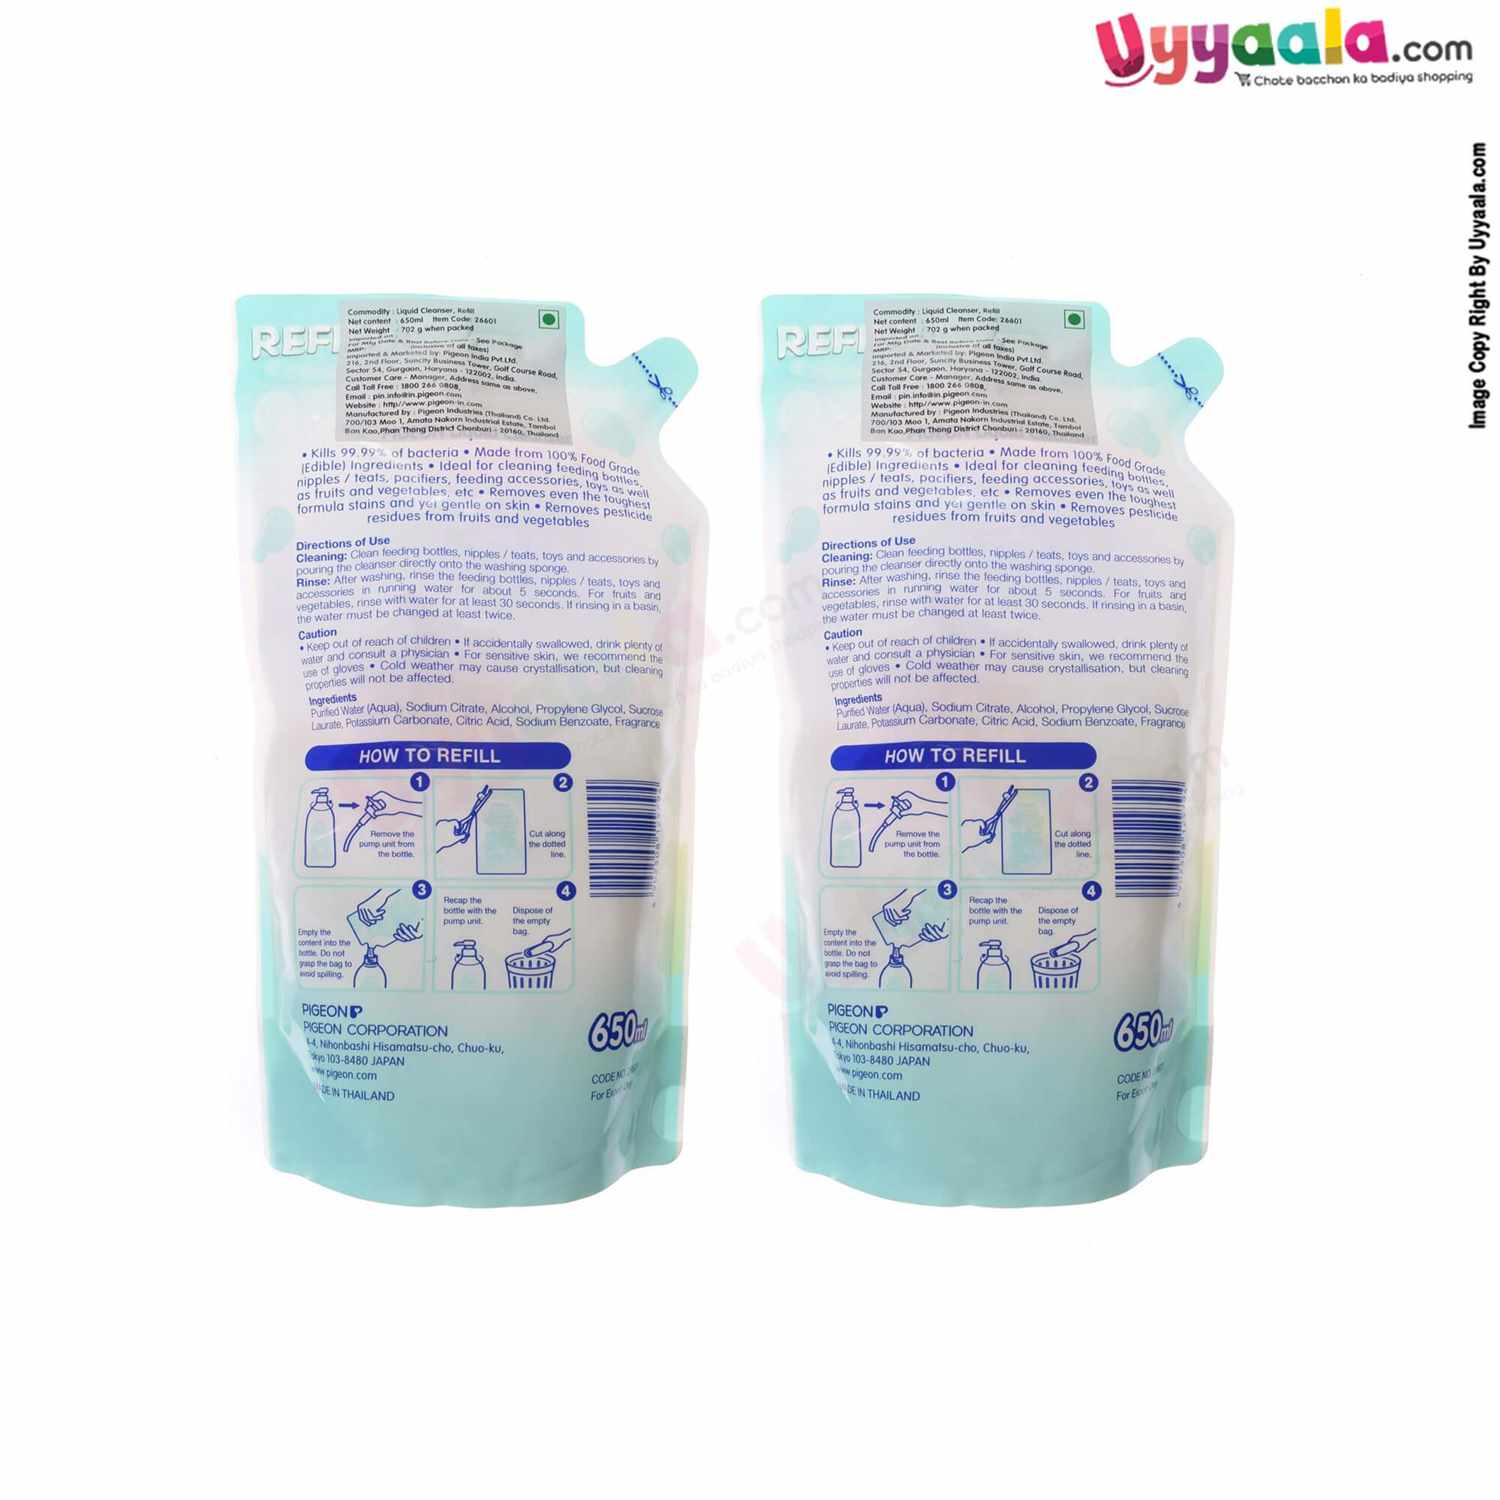 PIGEON Liquid Cleanser Anti-Bacterial Refill Pack of 2 - 650ml